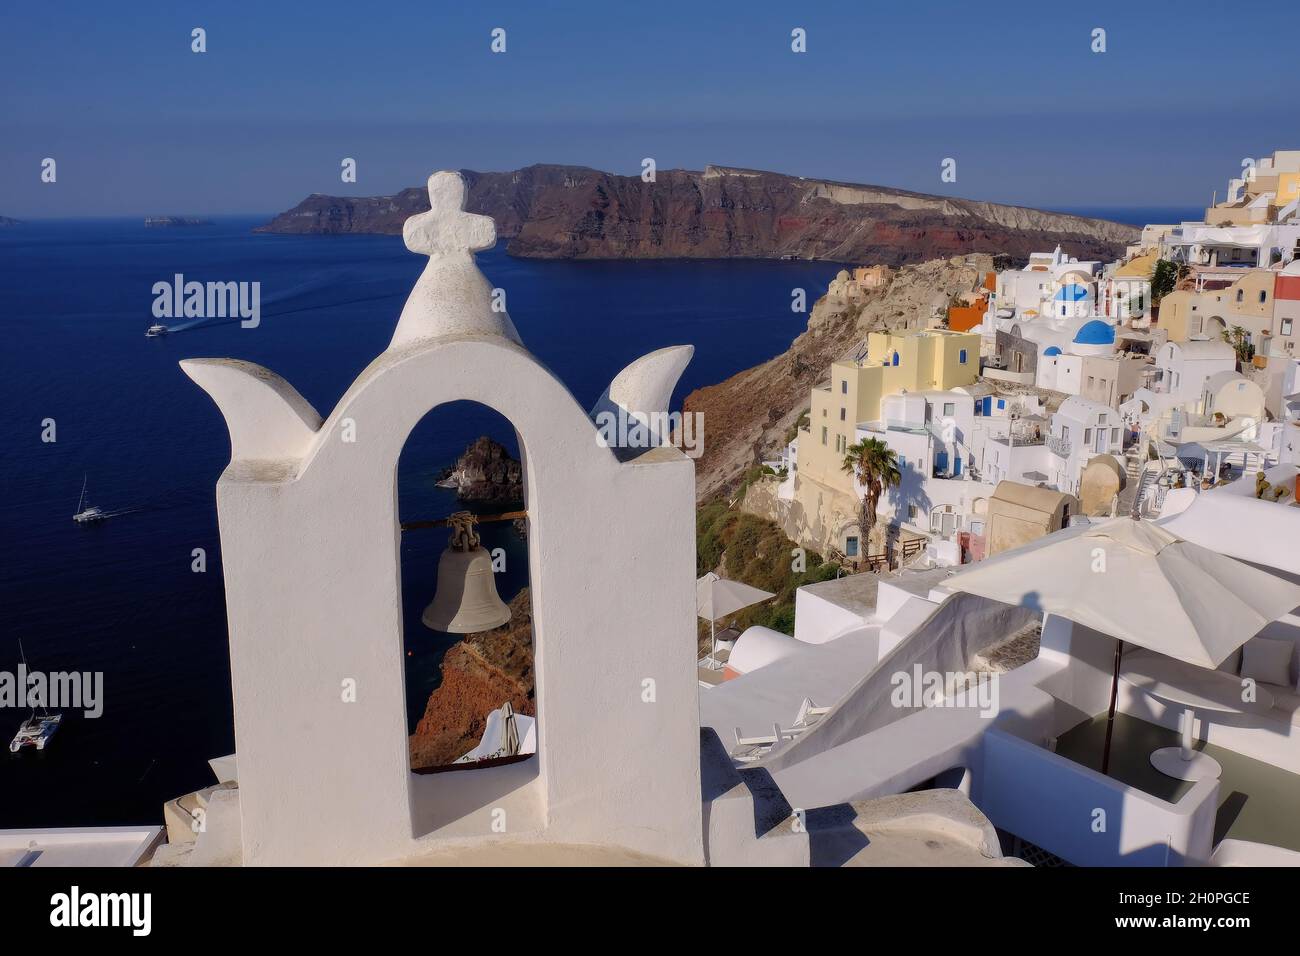 Sea, caldera, white bell tower and town soon after sunrise in Oia, Santorini Island (Thira), Cyclades, Greece Stock Photo